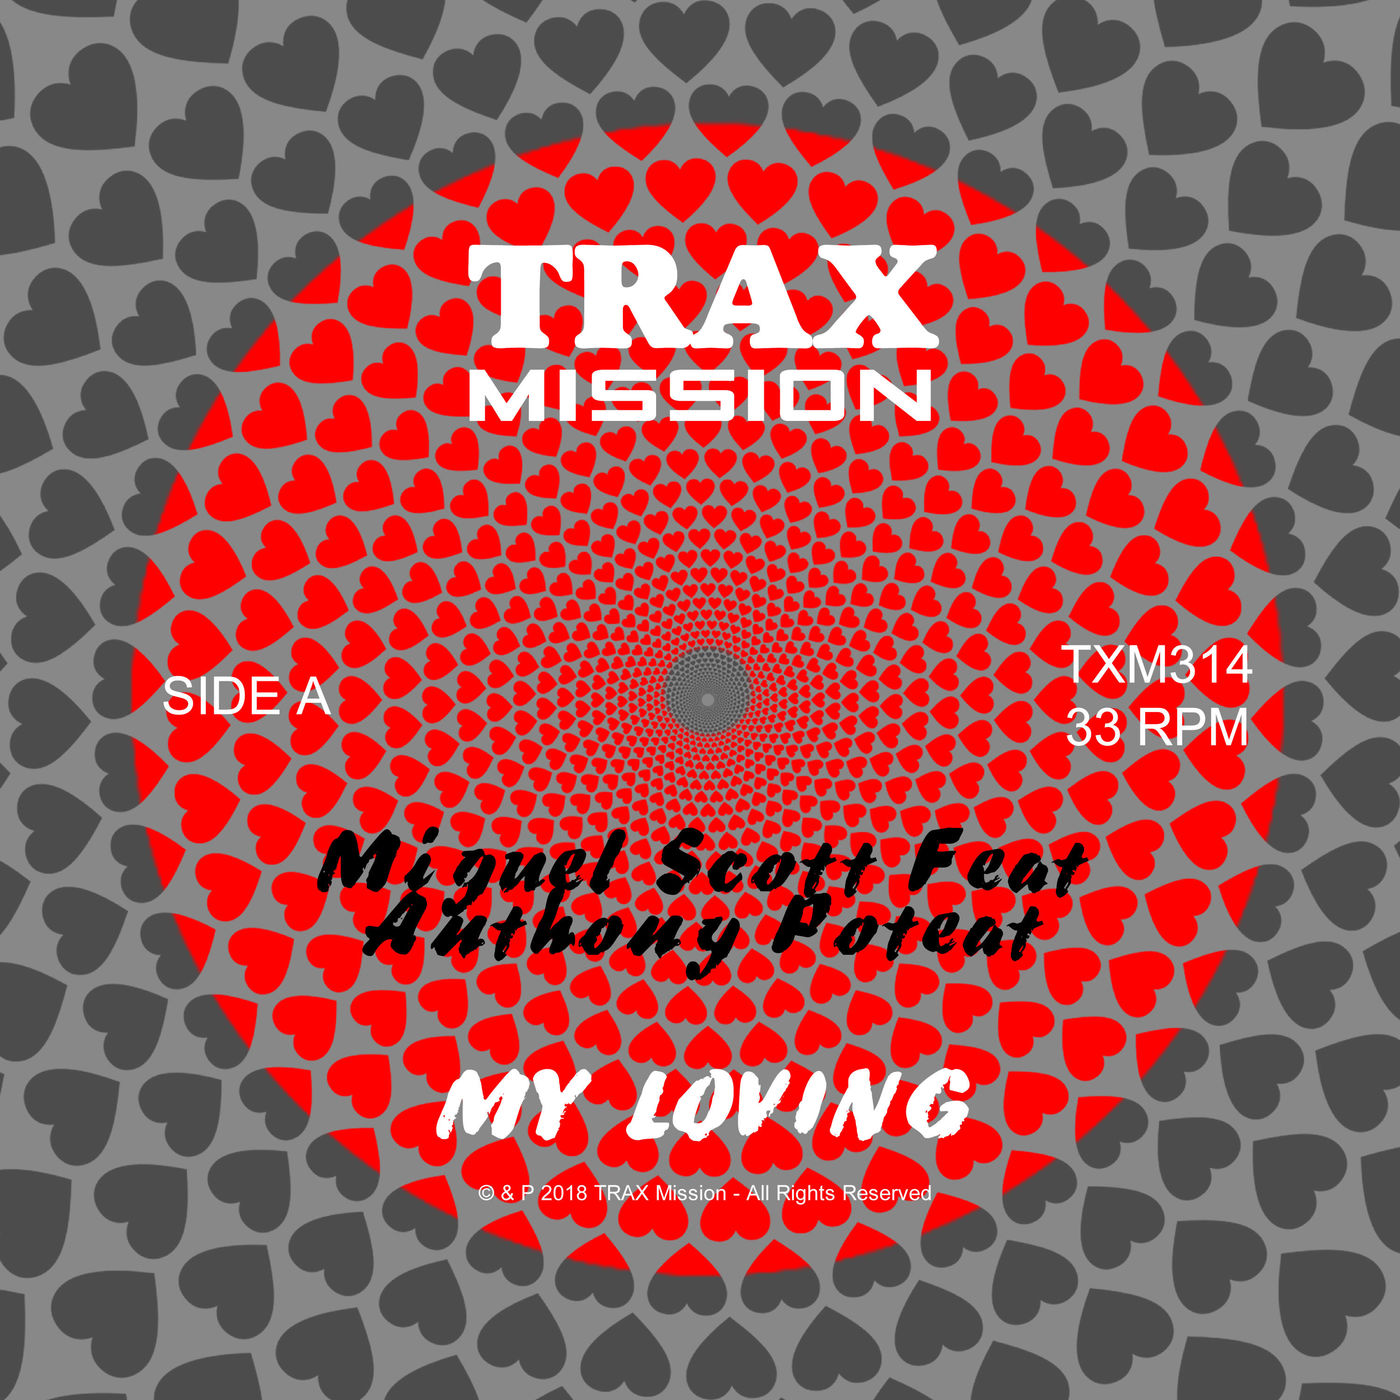 Miguel Scott ft Anthony Poteat - My Loving / TRAX Mission